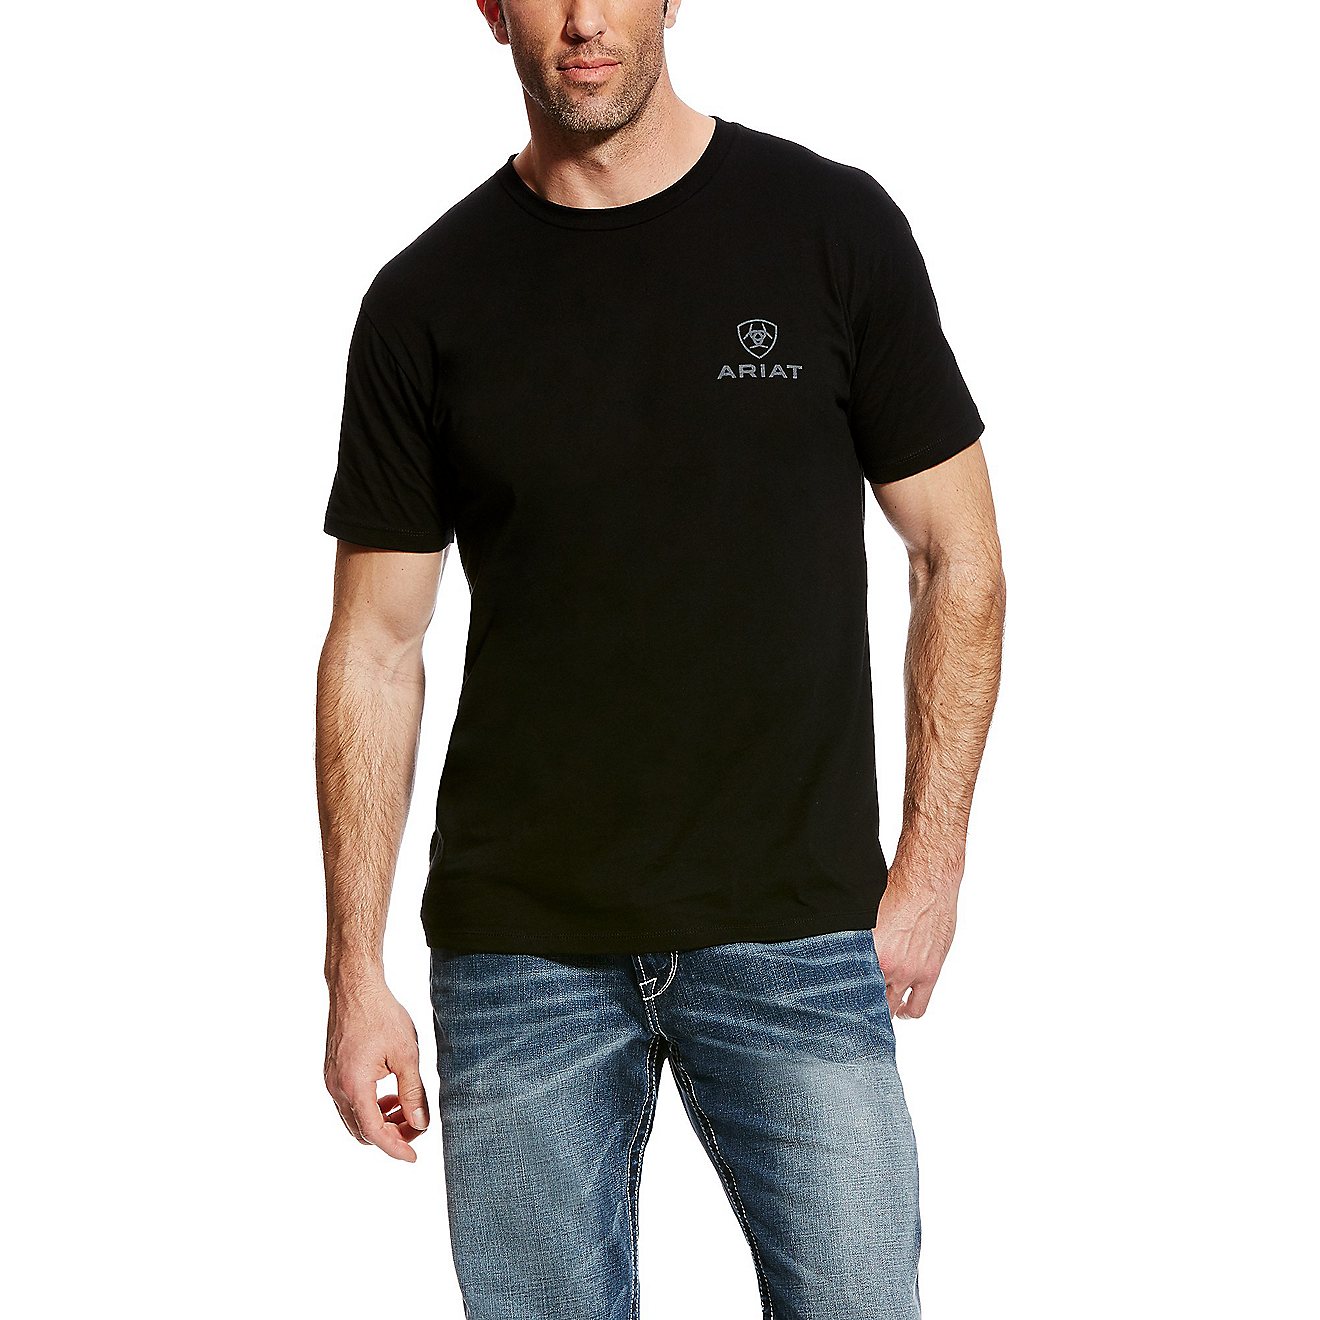 Ariat Men’s Corporate T-shirt | Free Shipping at Academy